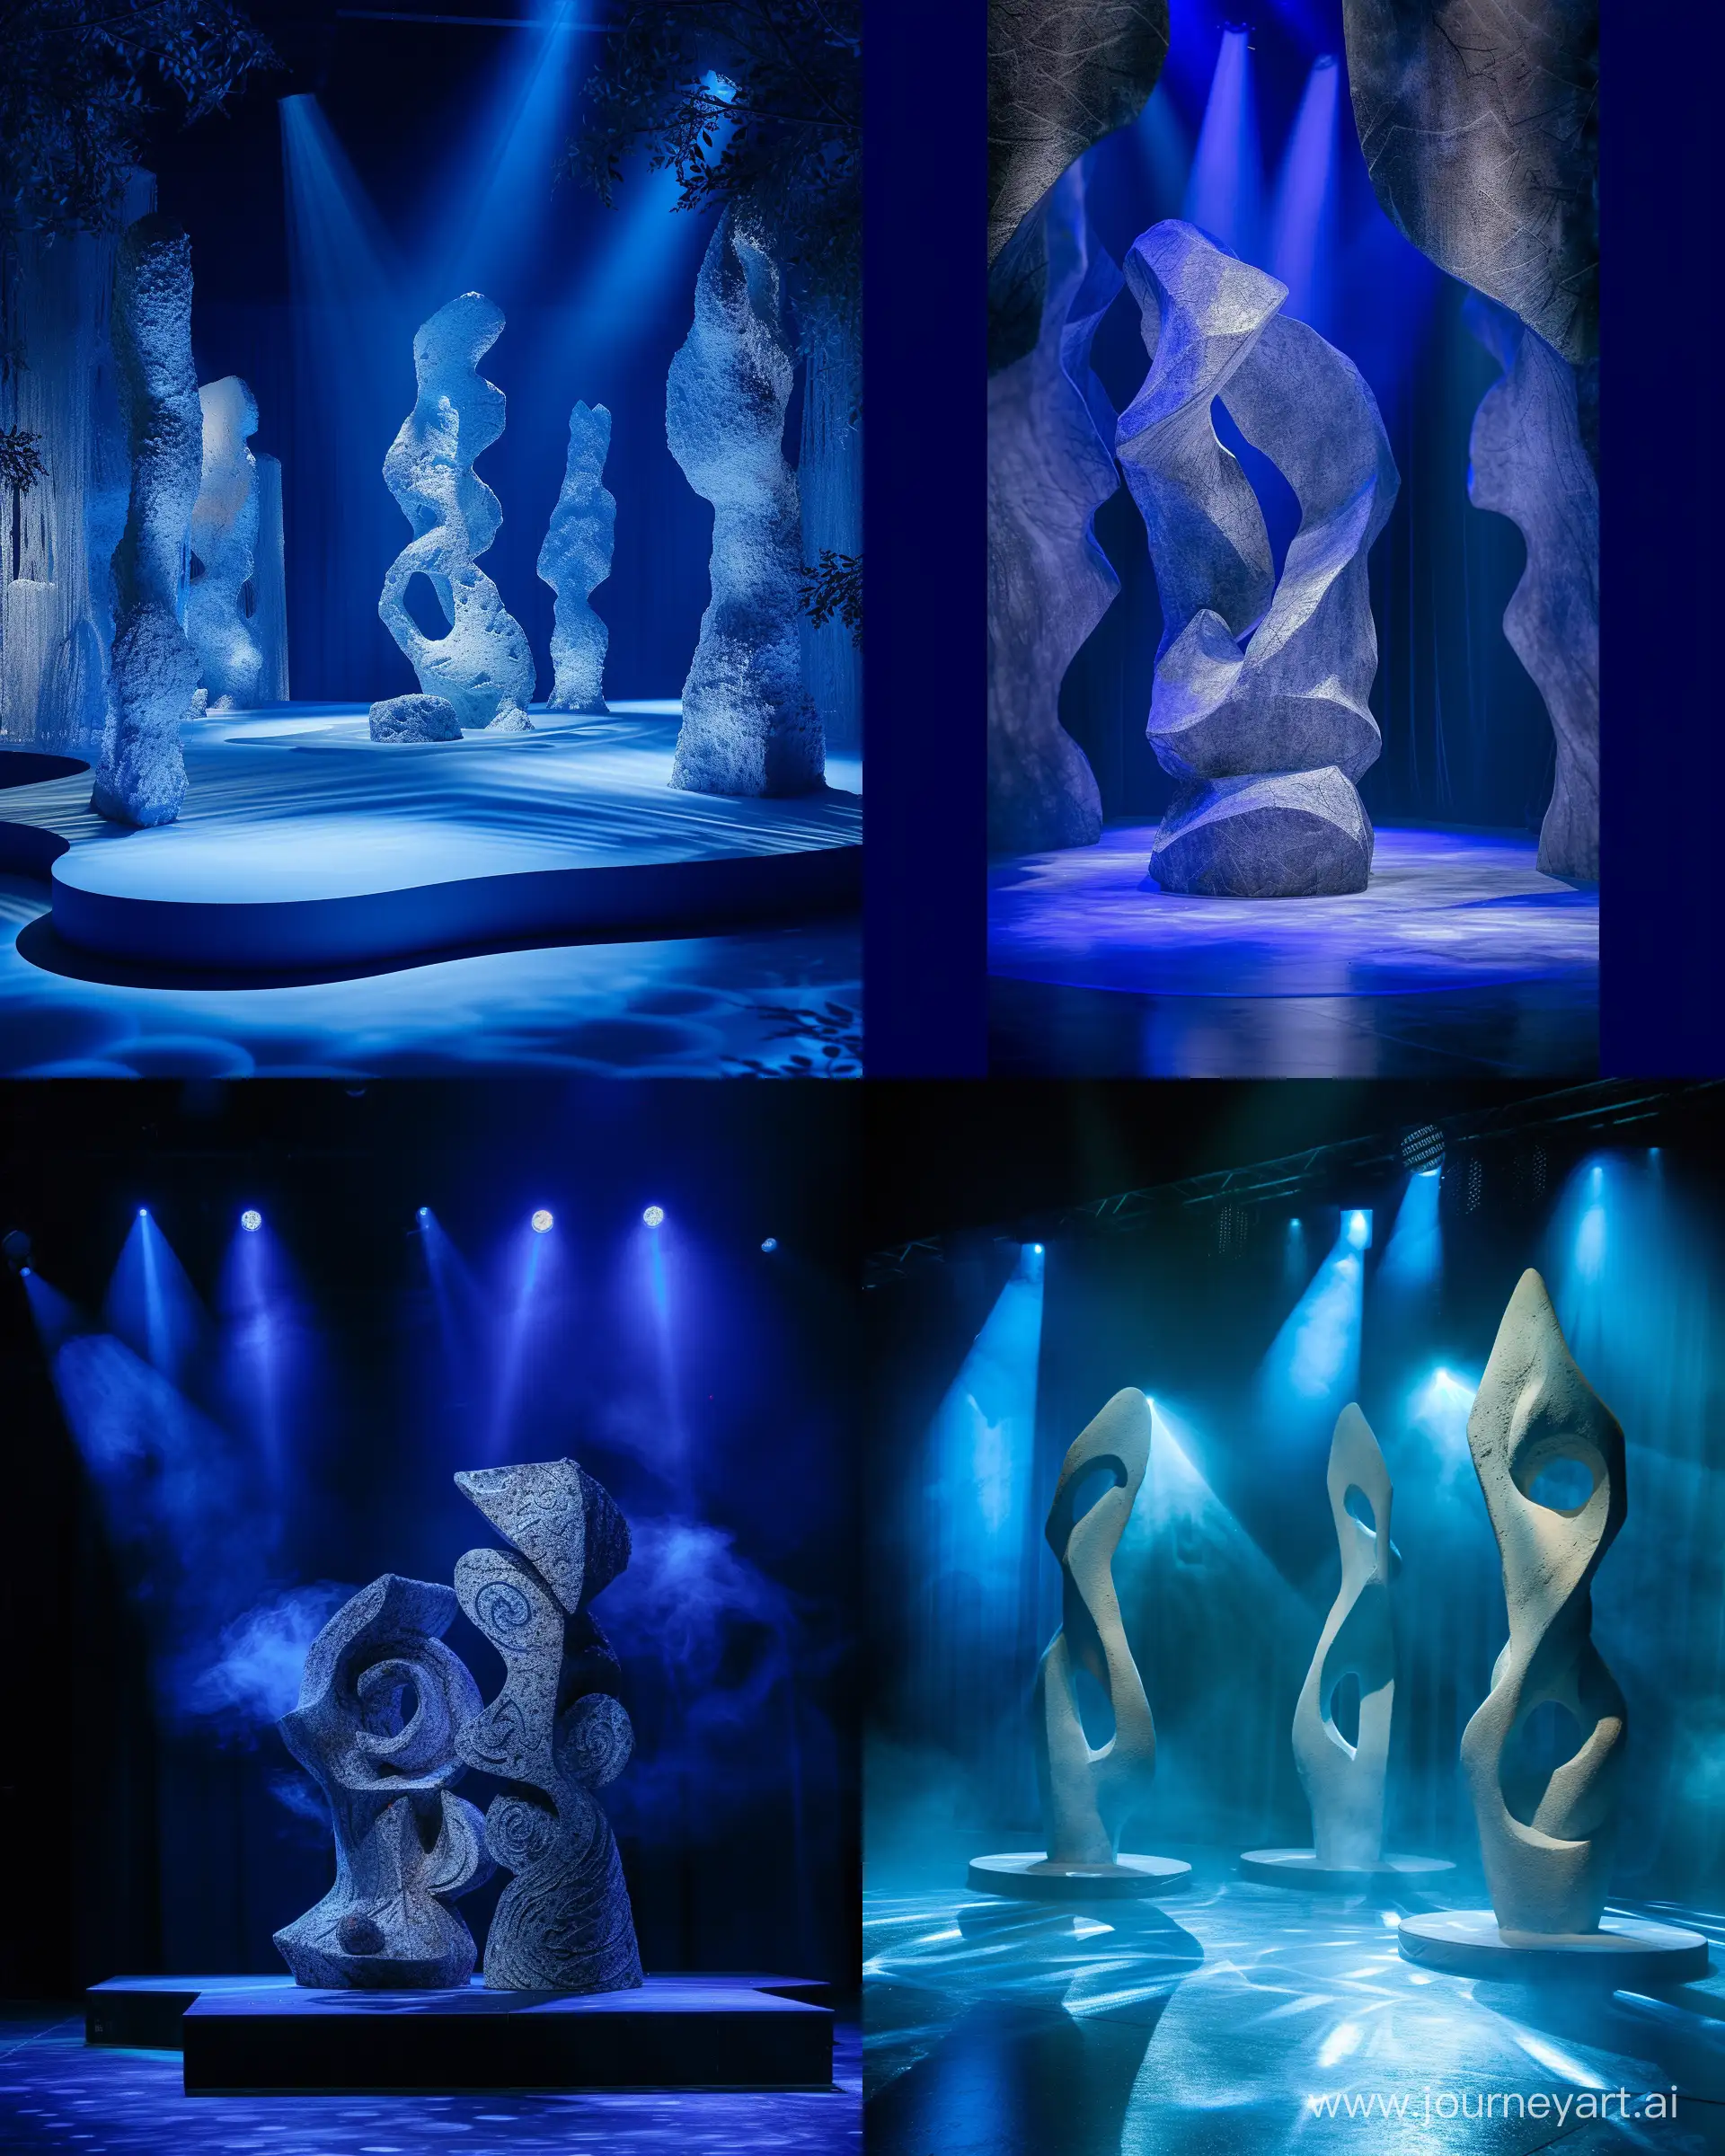 Surreal-Abstract-Sculptures-in-Enigmatic-Blue-Lighting